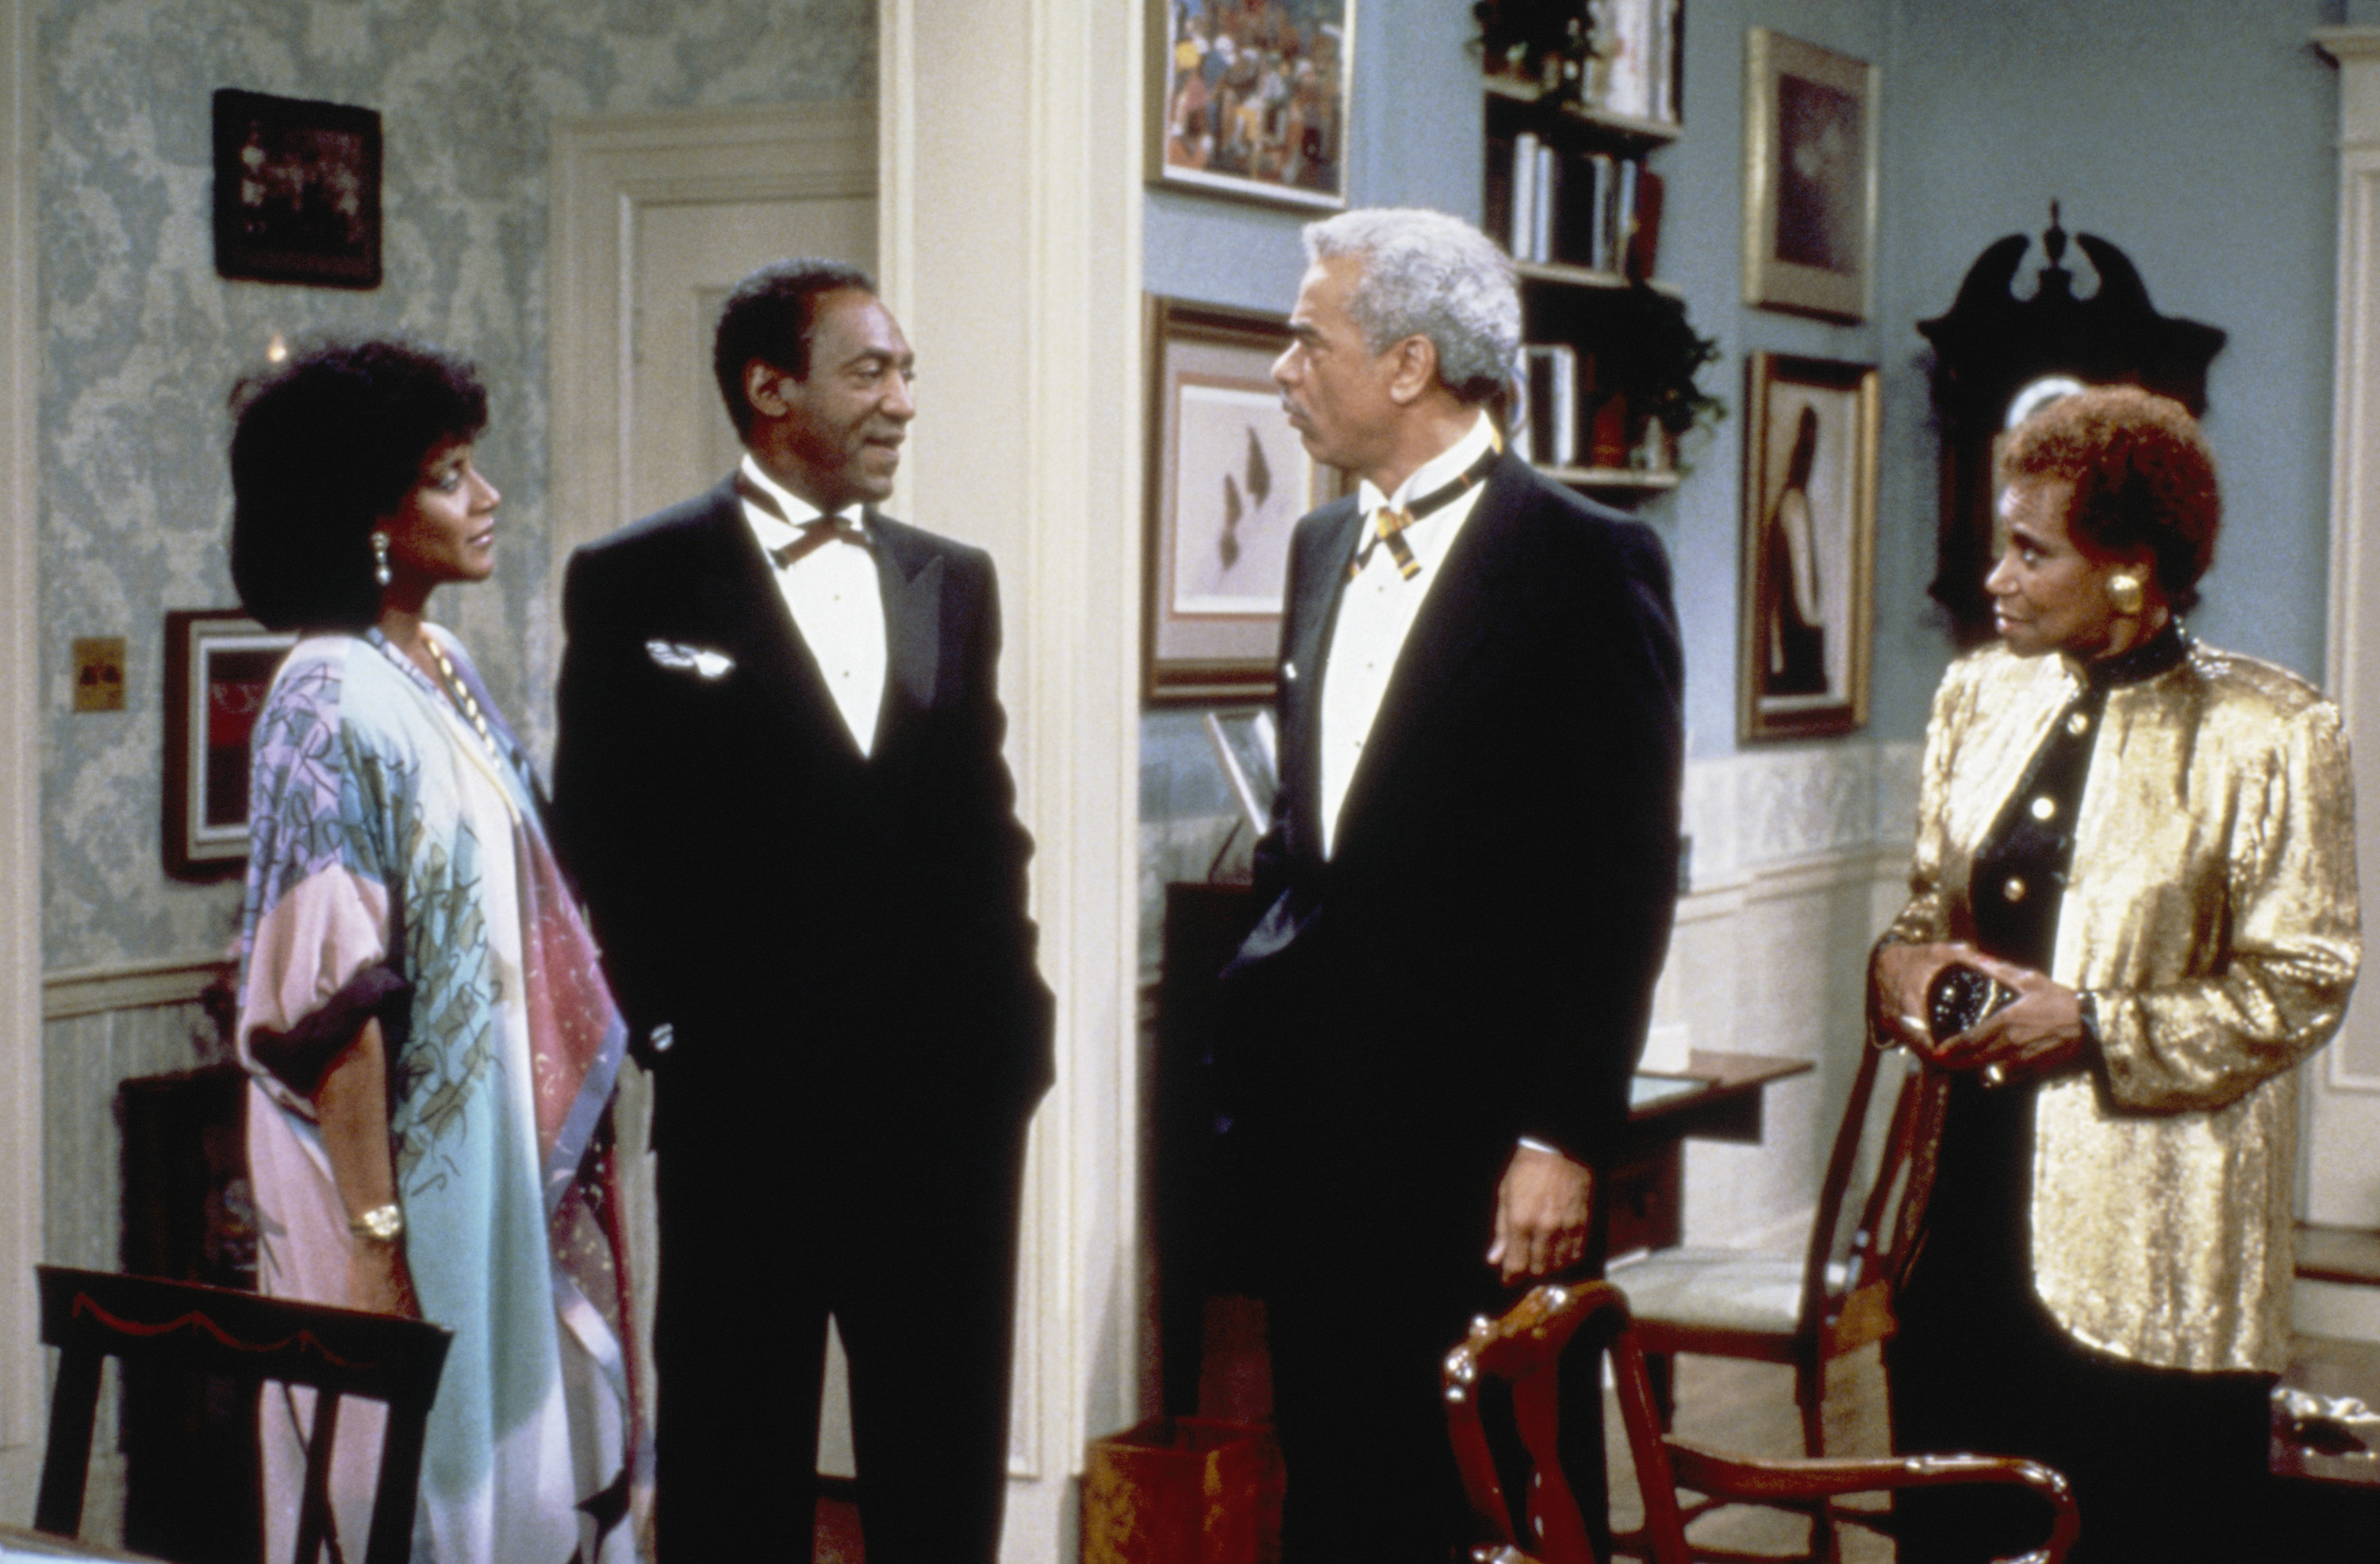 Still of Bill Cosby, Earle Hyman, Phylicia Rashad and Clarice Taylor in The Cosby Show (1984)